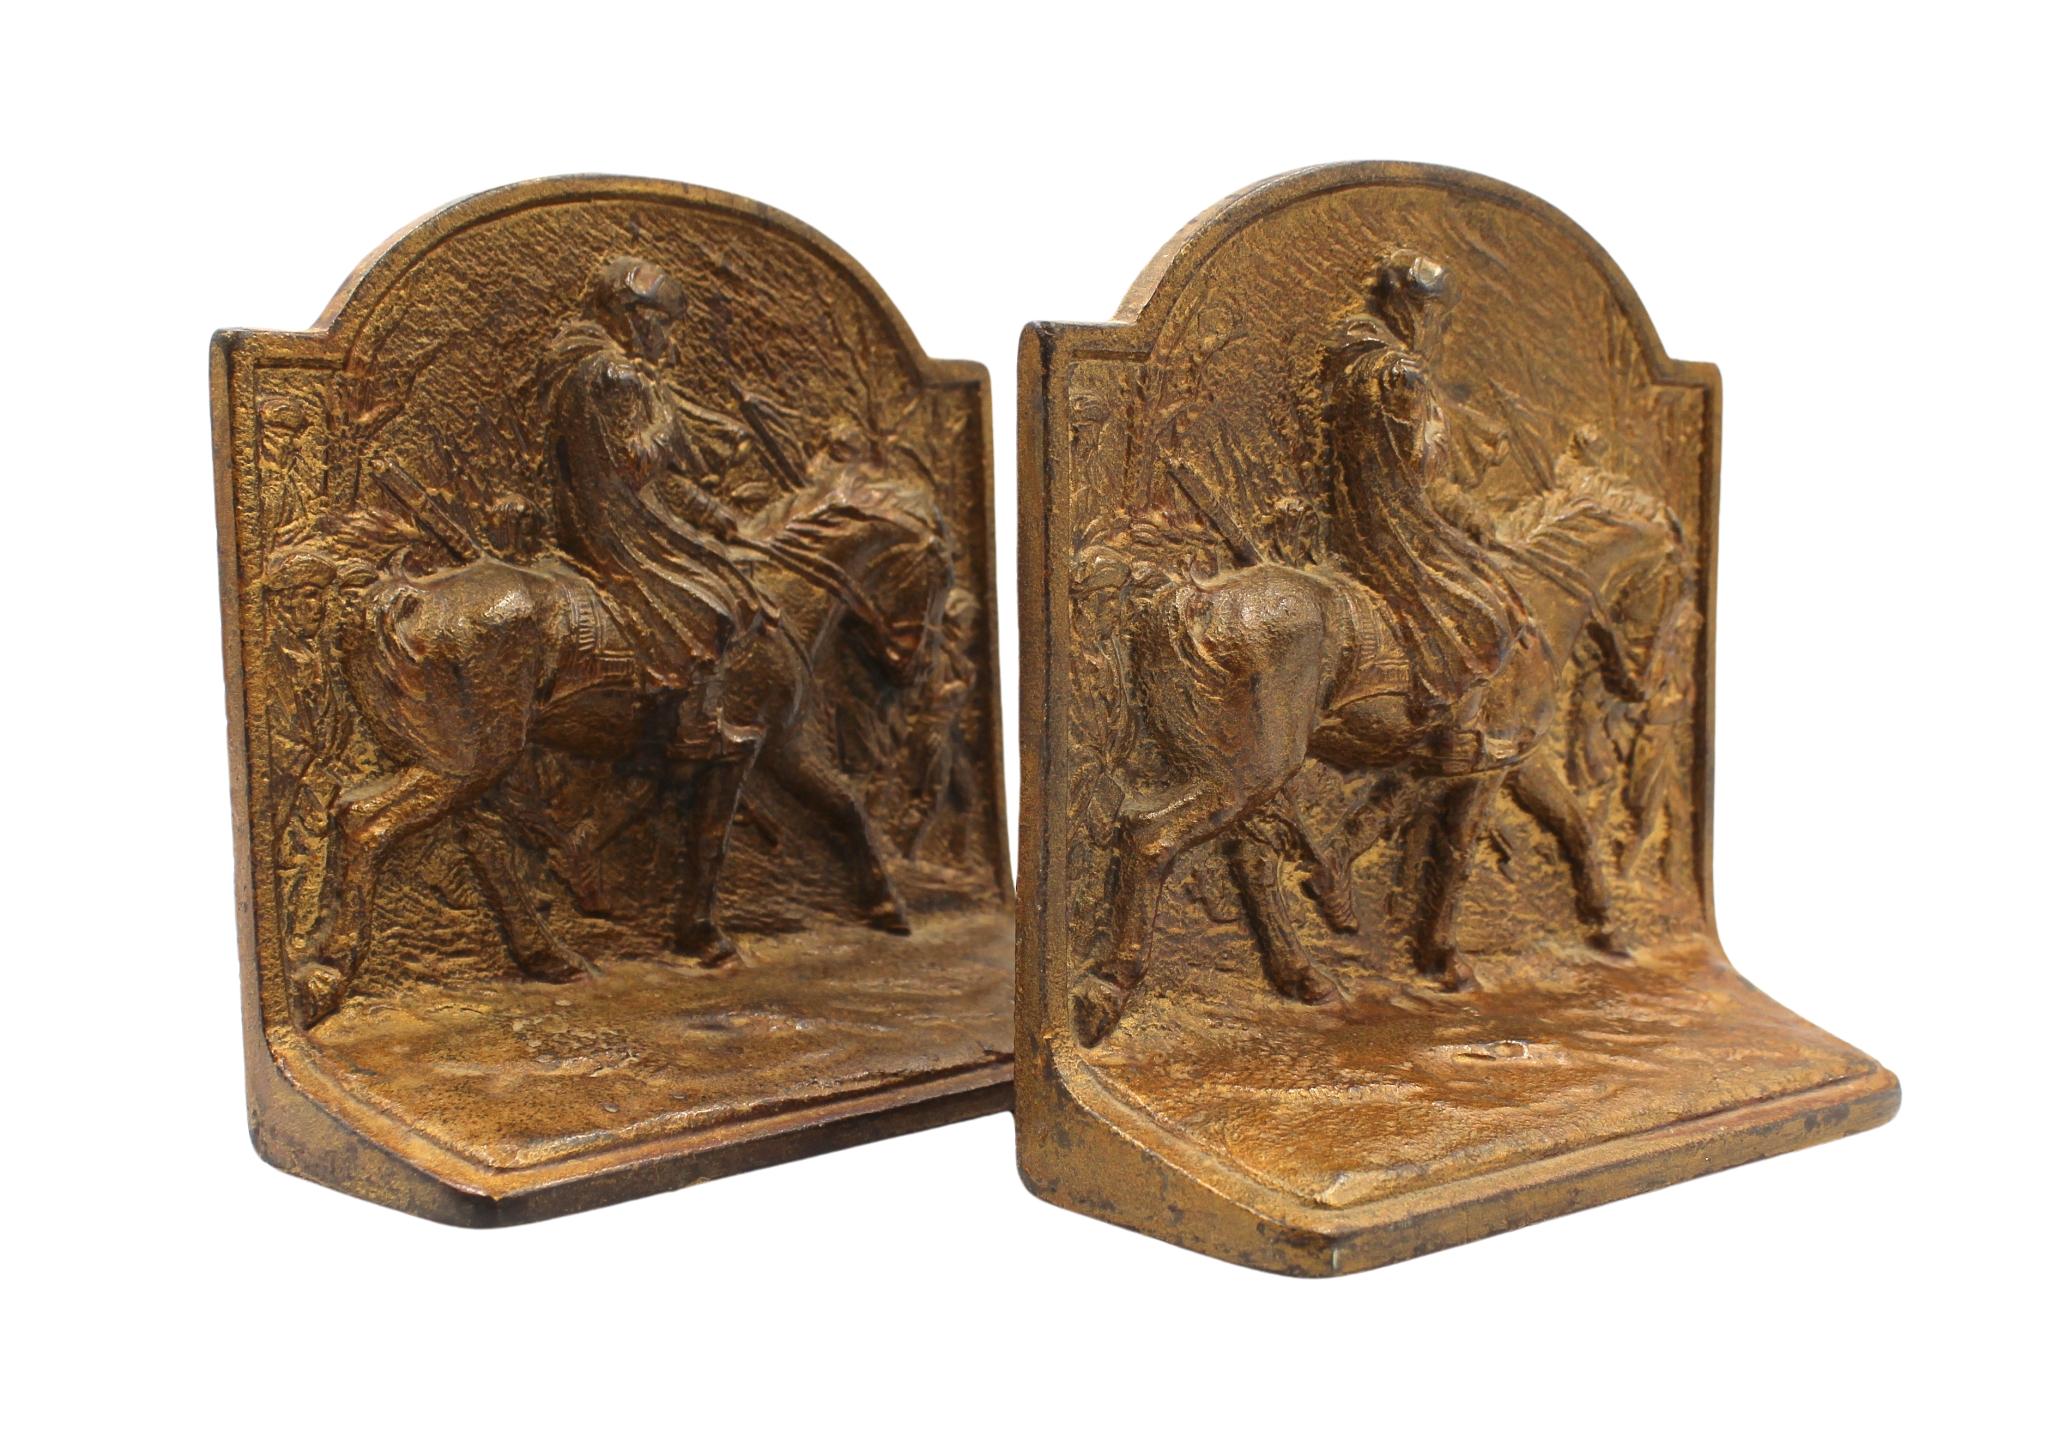 Offered is a vintage set of Washington at Valley Forge bookends. The bookends were made by the American maker Hubley Manufacturing Co. in 1925. The bookends are in the style of the famous oil painting by William B. T. Trego. The March to Valley